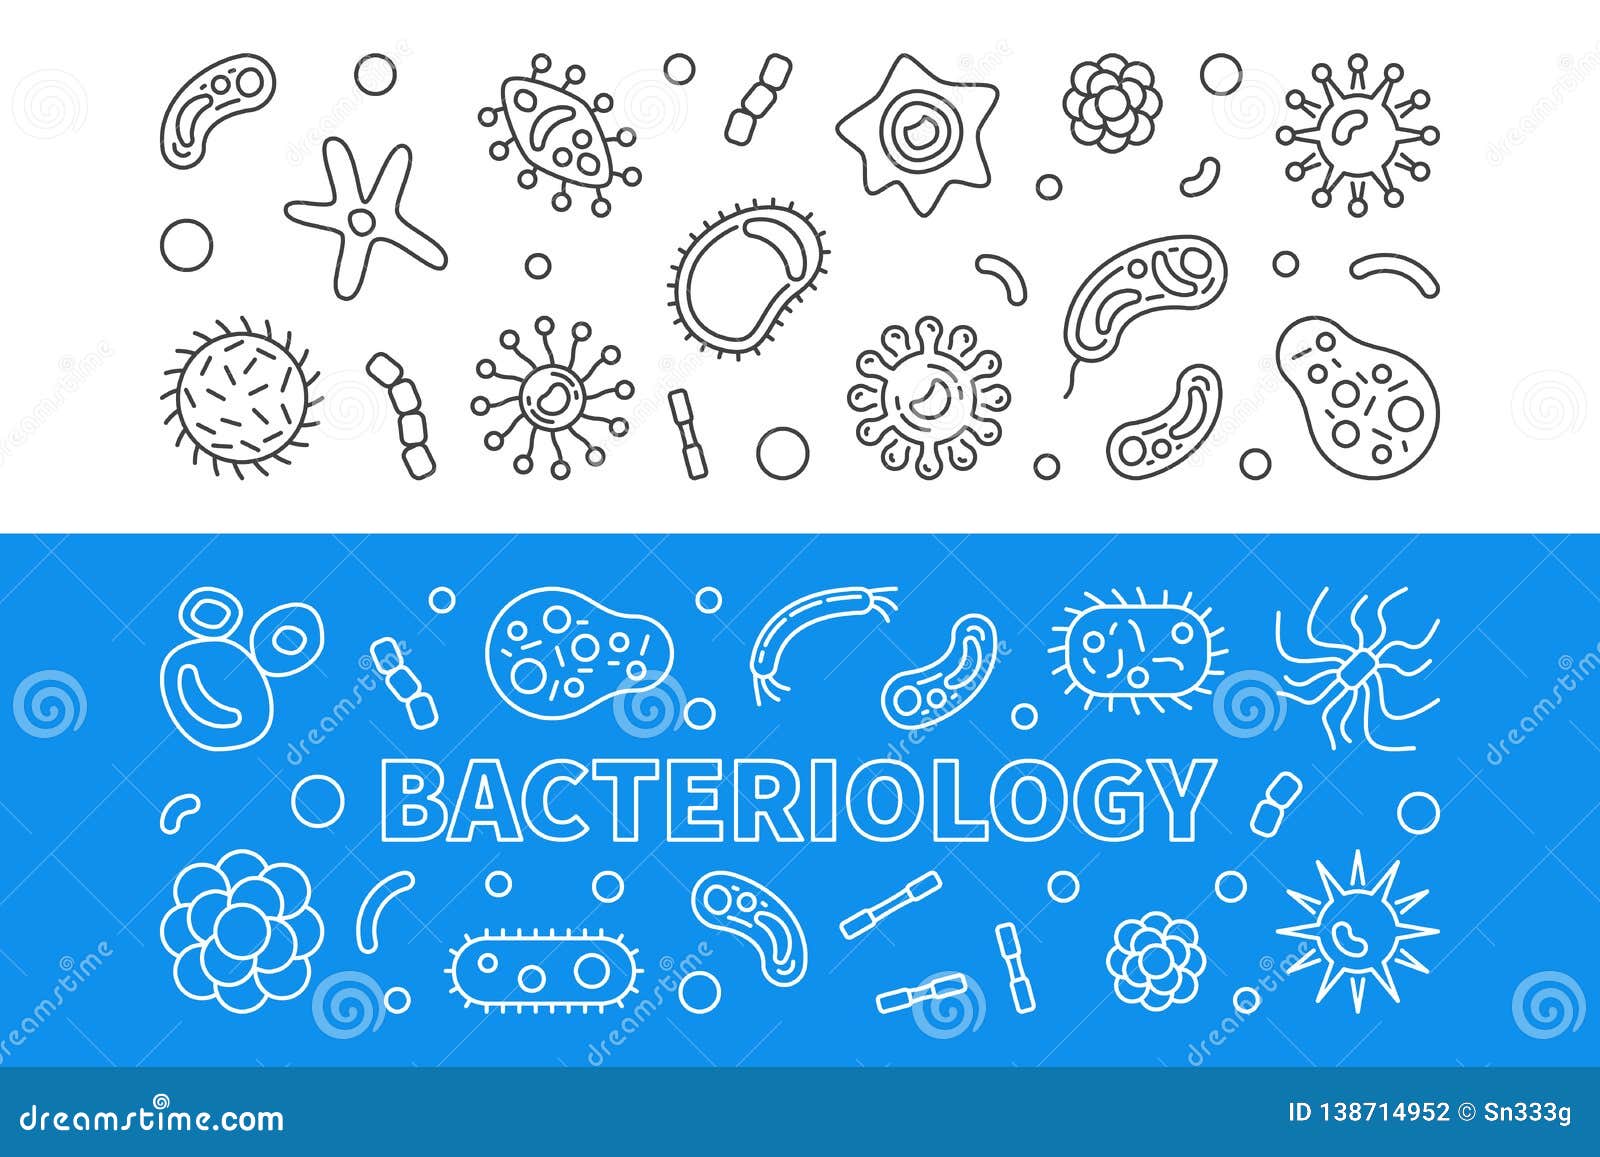 bacteriology horizontal outline banners.  